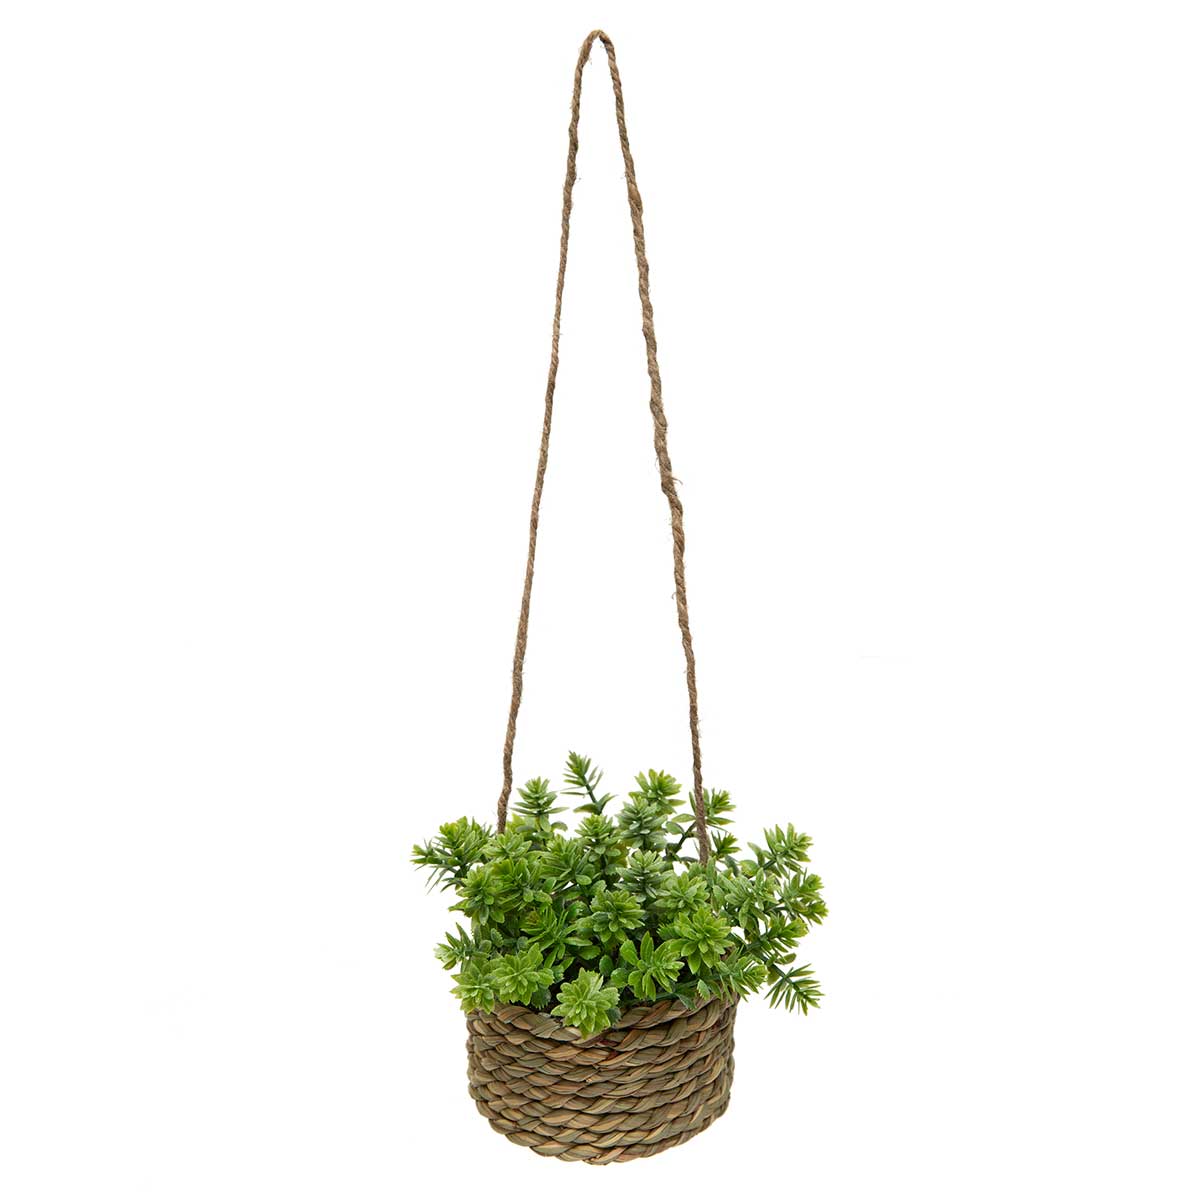 SEDUM IN BASKET 5.5IN X 3.5IN WITH TWINE HANGER - Click Image to Close